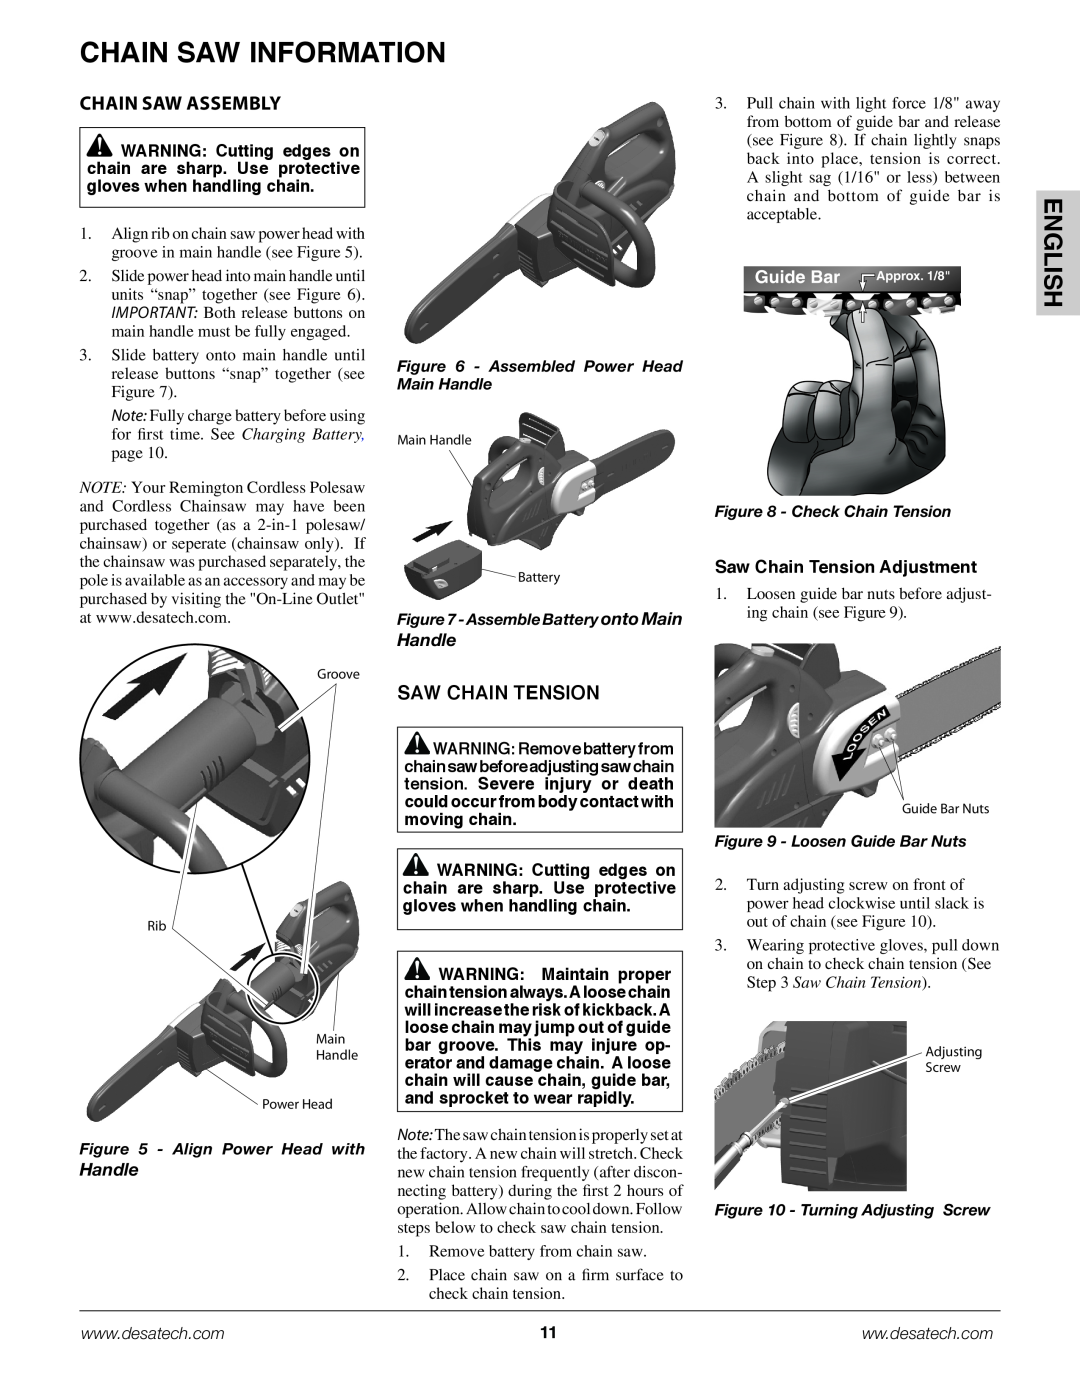 Remington Power Tools BS188A, BPS188A, BS188A owner manual English, Chain Saw Assembly, Saw Chain Tension, Handle 